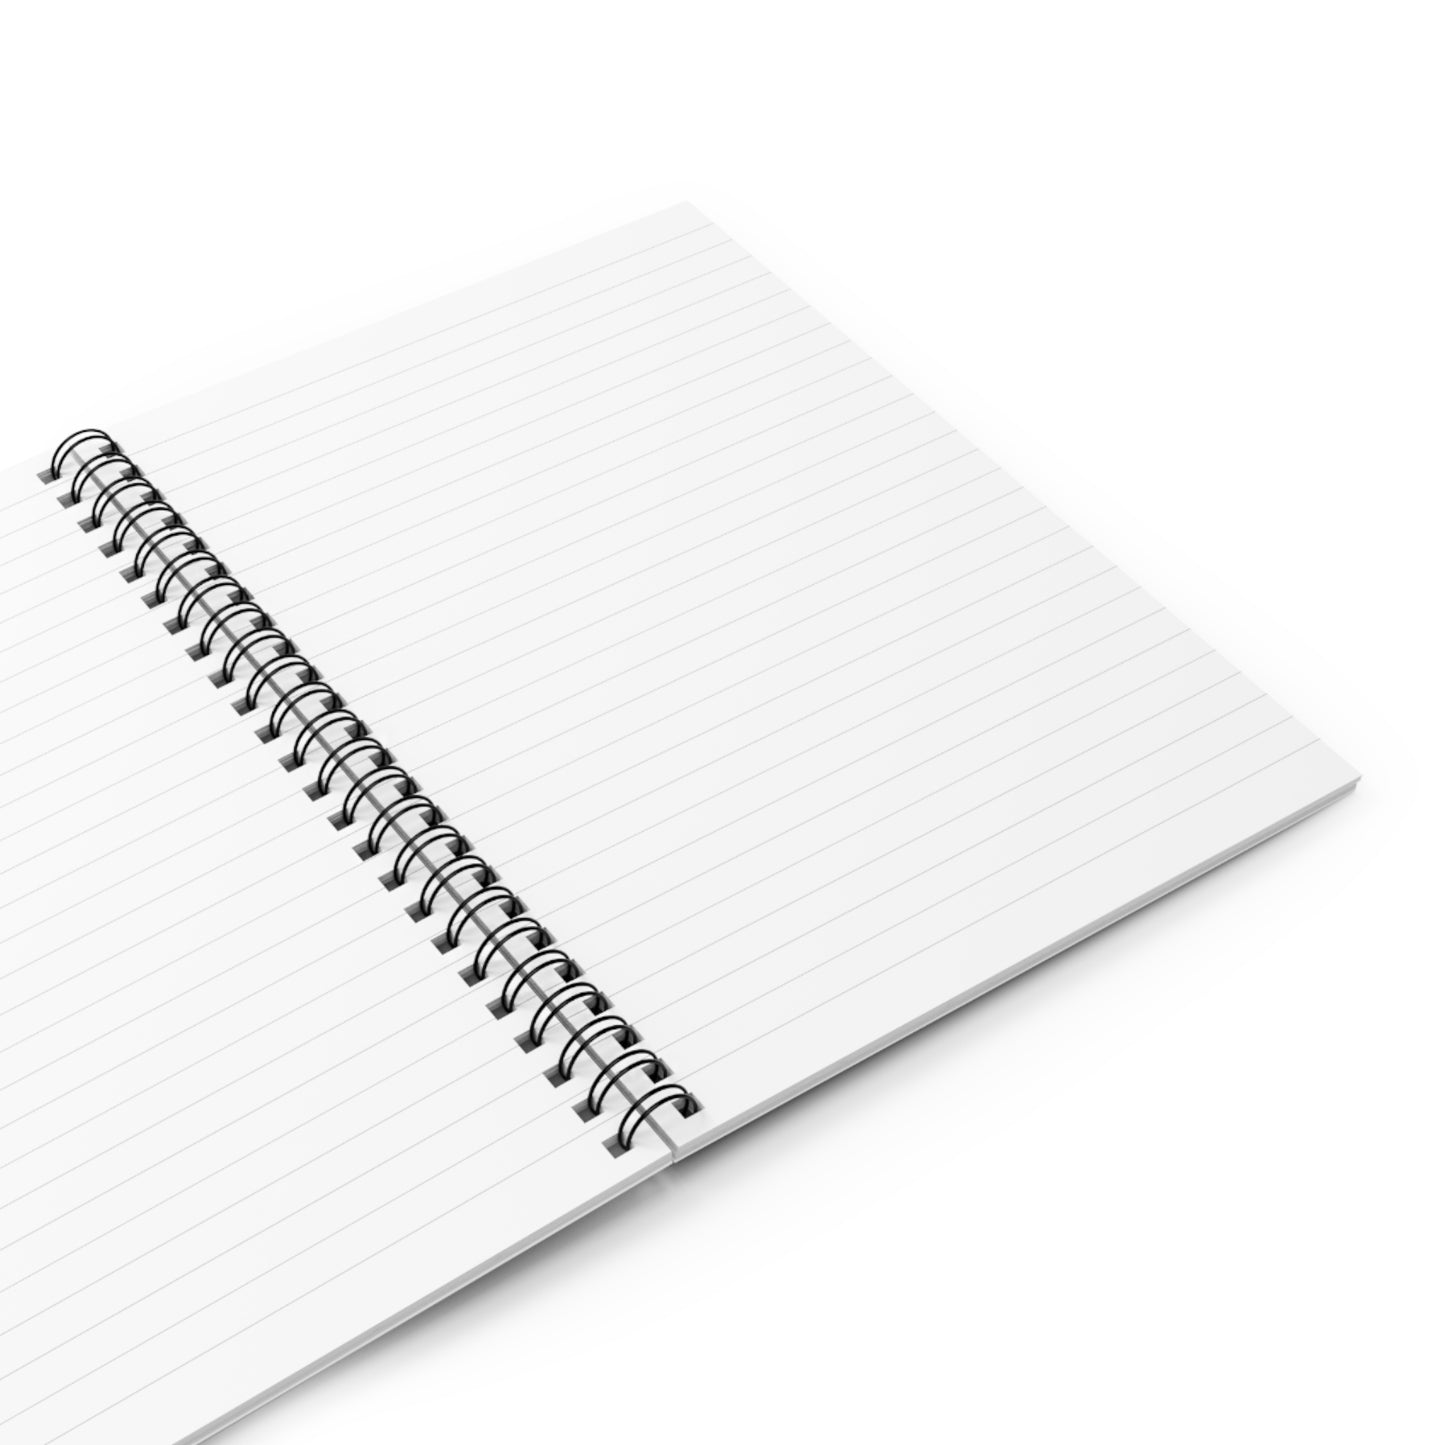 Back Yourself - Ruled Line Notebook